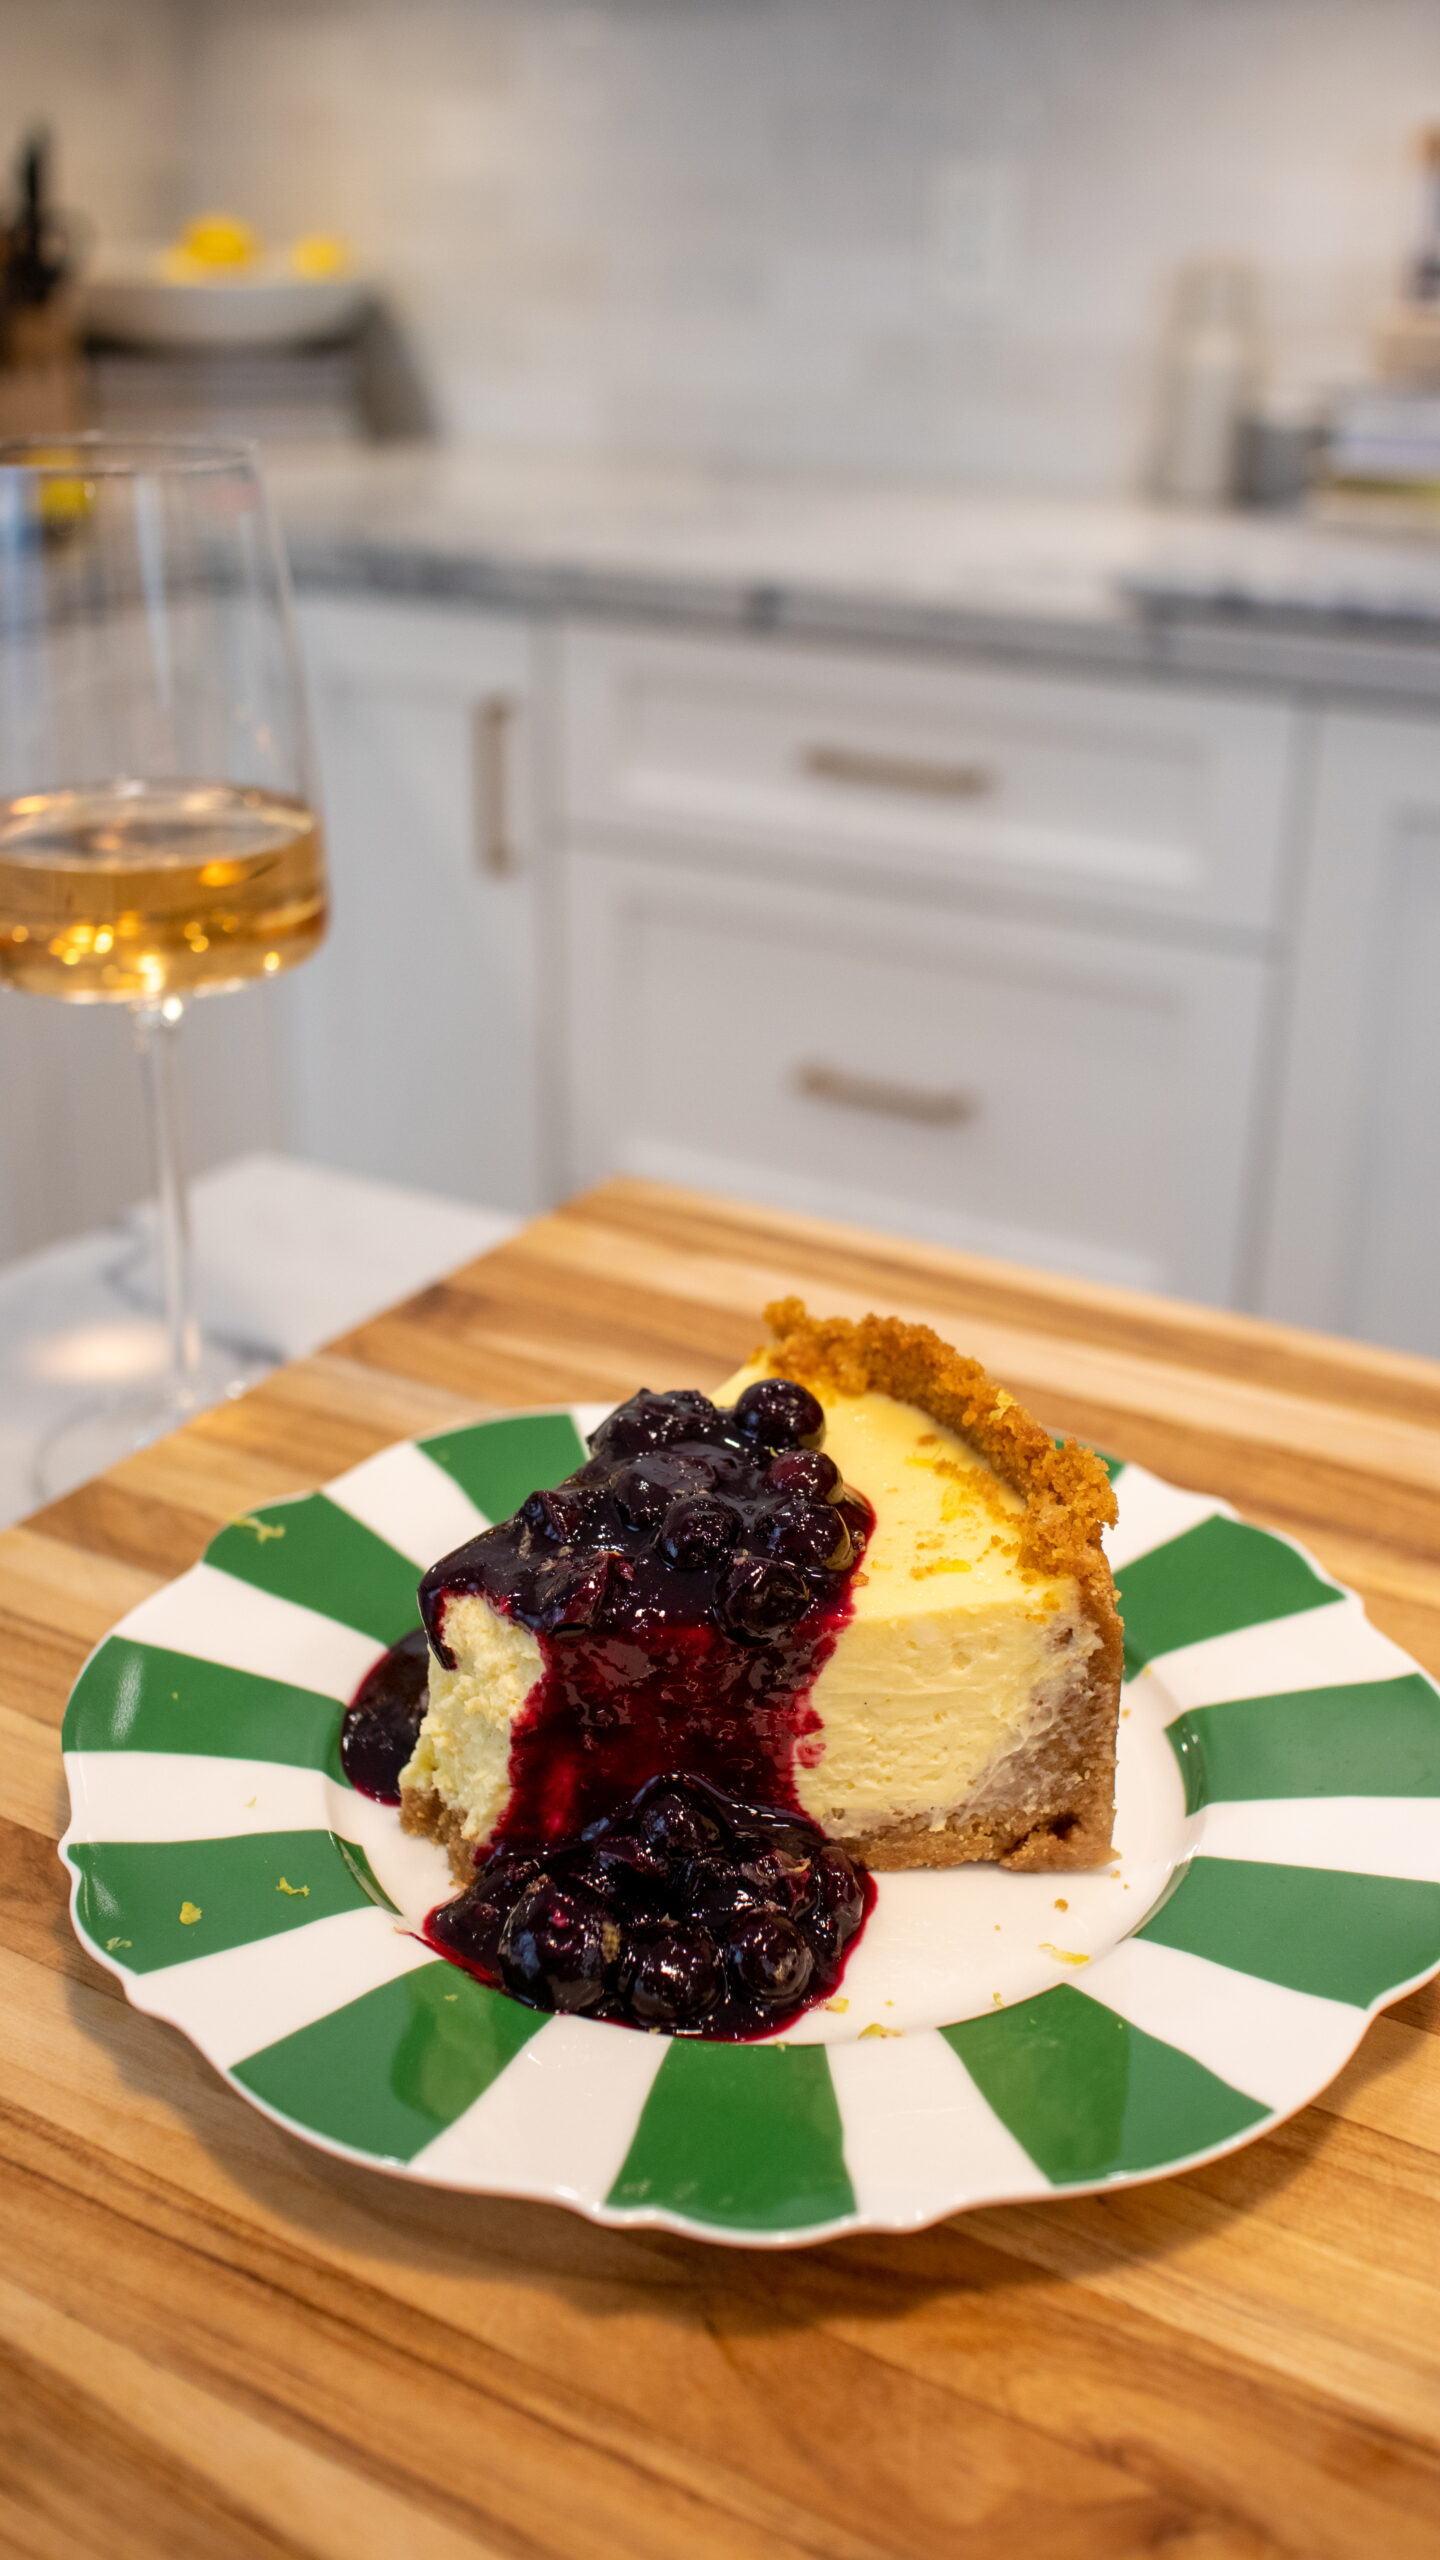 This Lemon Cheesecake with Blueberry Compote is surprisingly easy to make, creamy, and delicious, making it the perfect dessert to have with friends and family